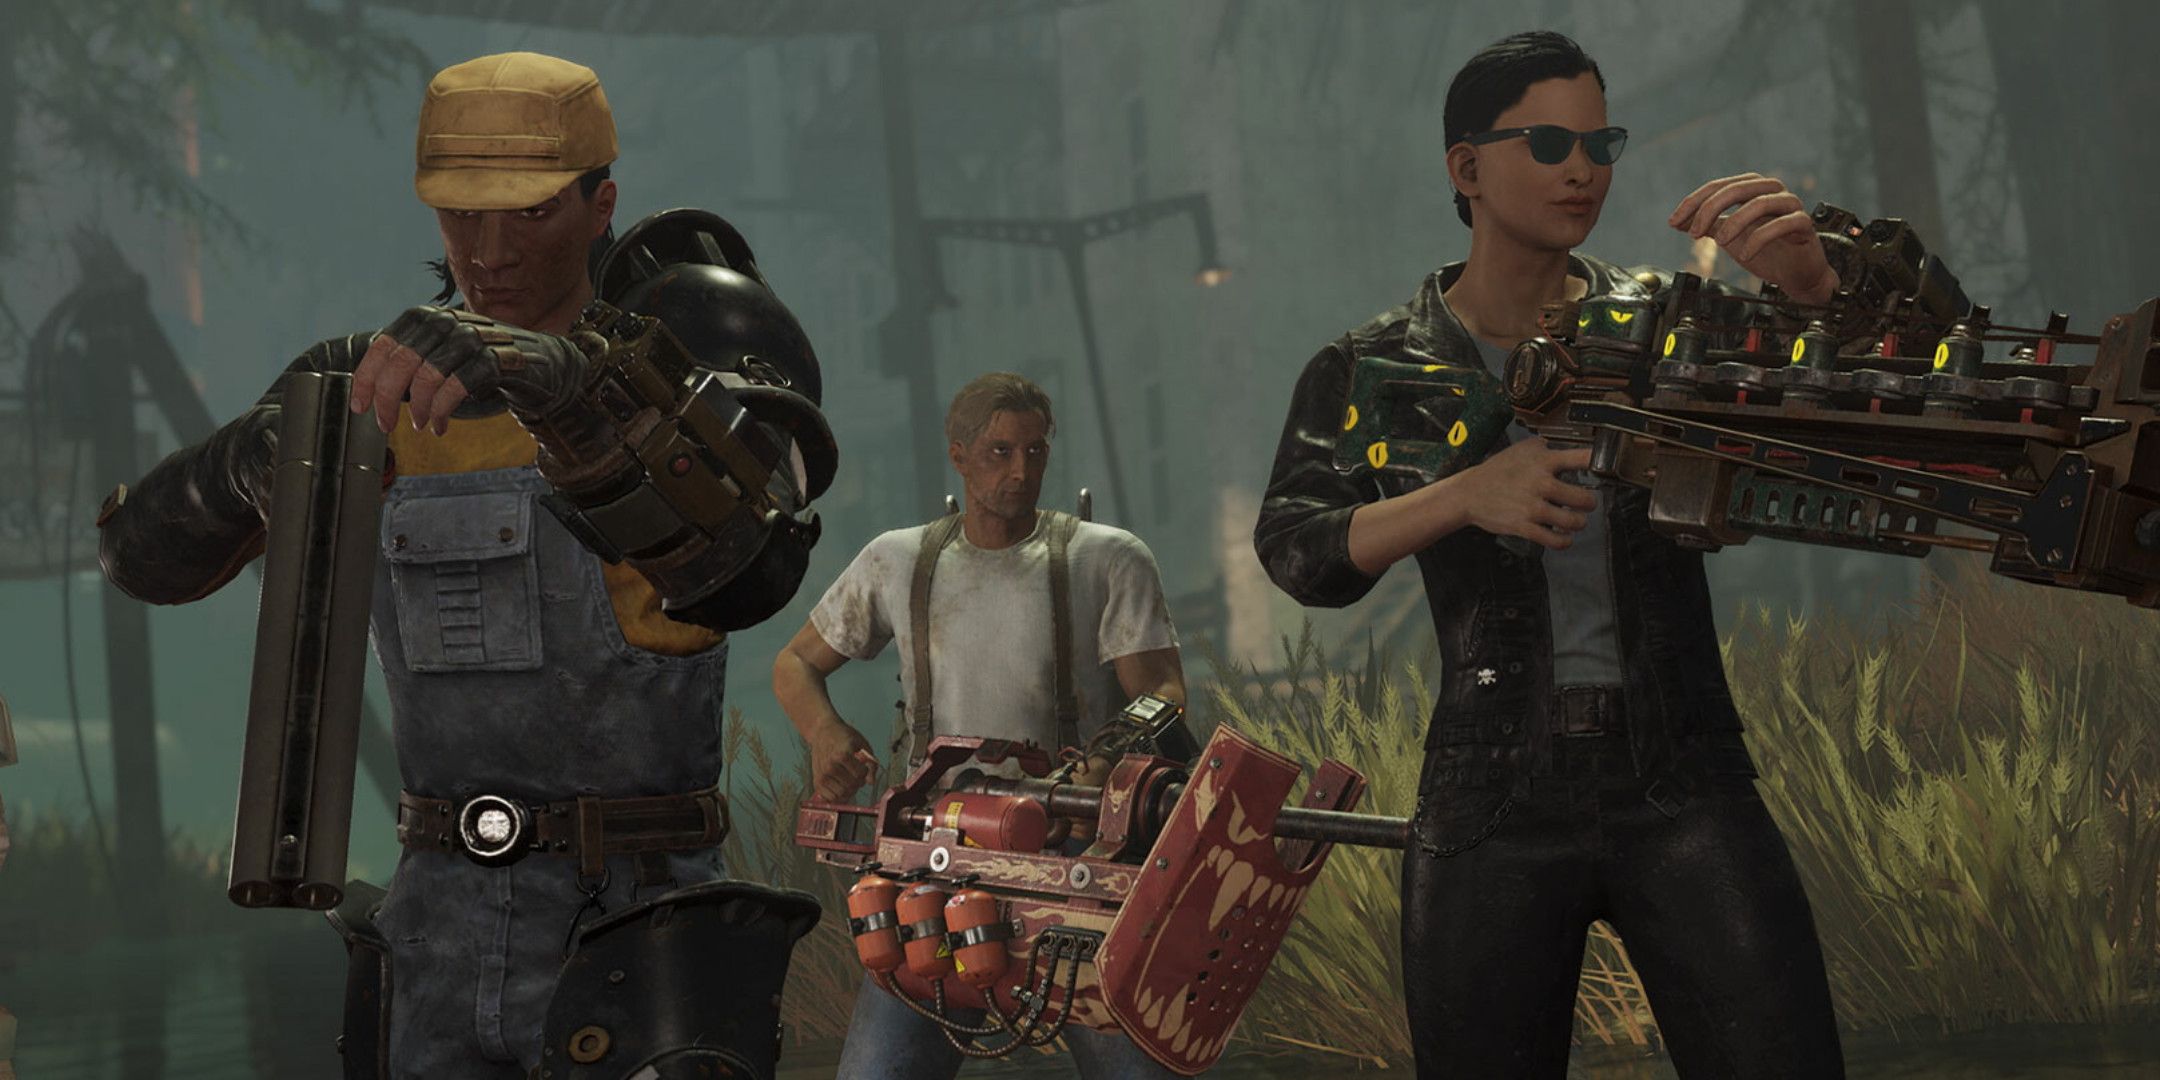 Three Fallout 76 players with various weapons stood in a swamp